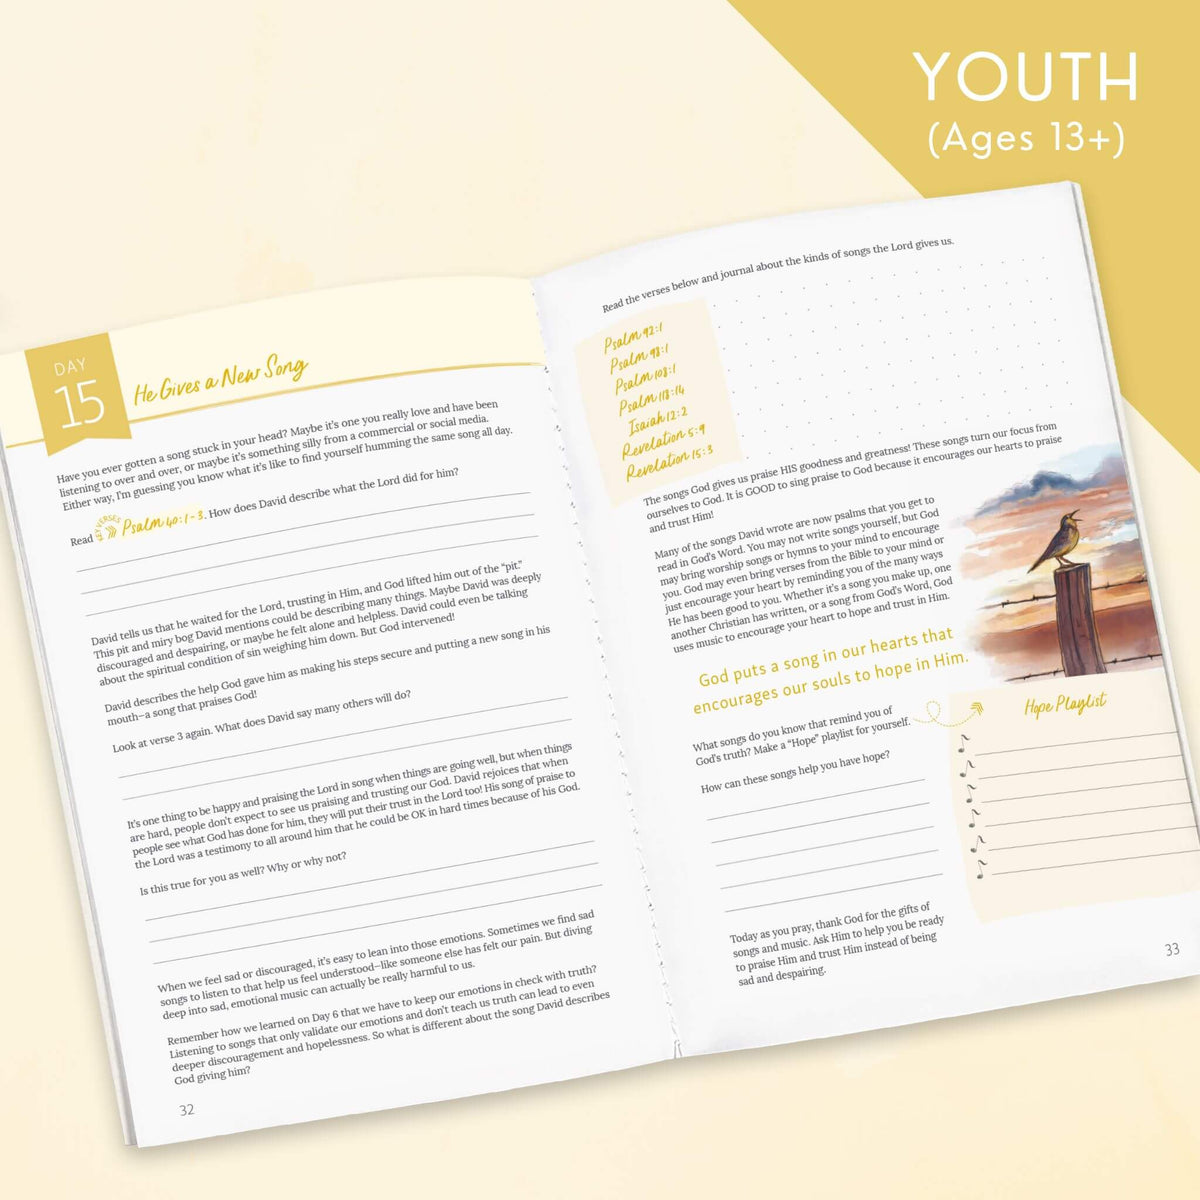 Abounding in Hope digital printable Bible Study for teens- inside